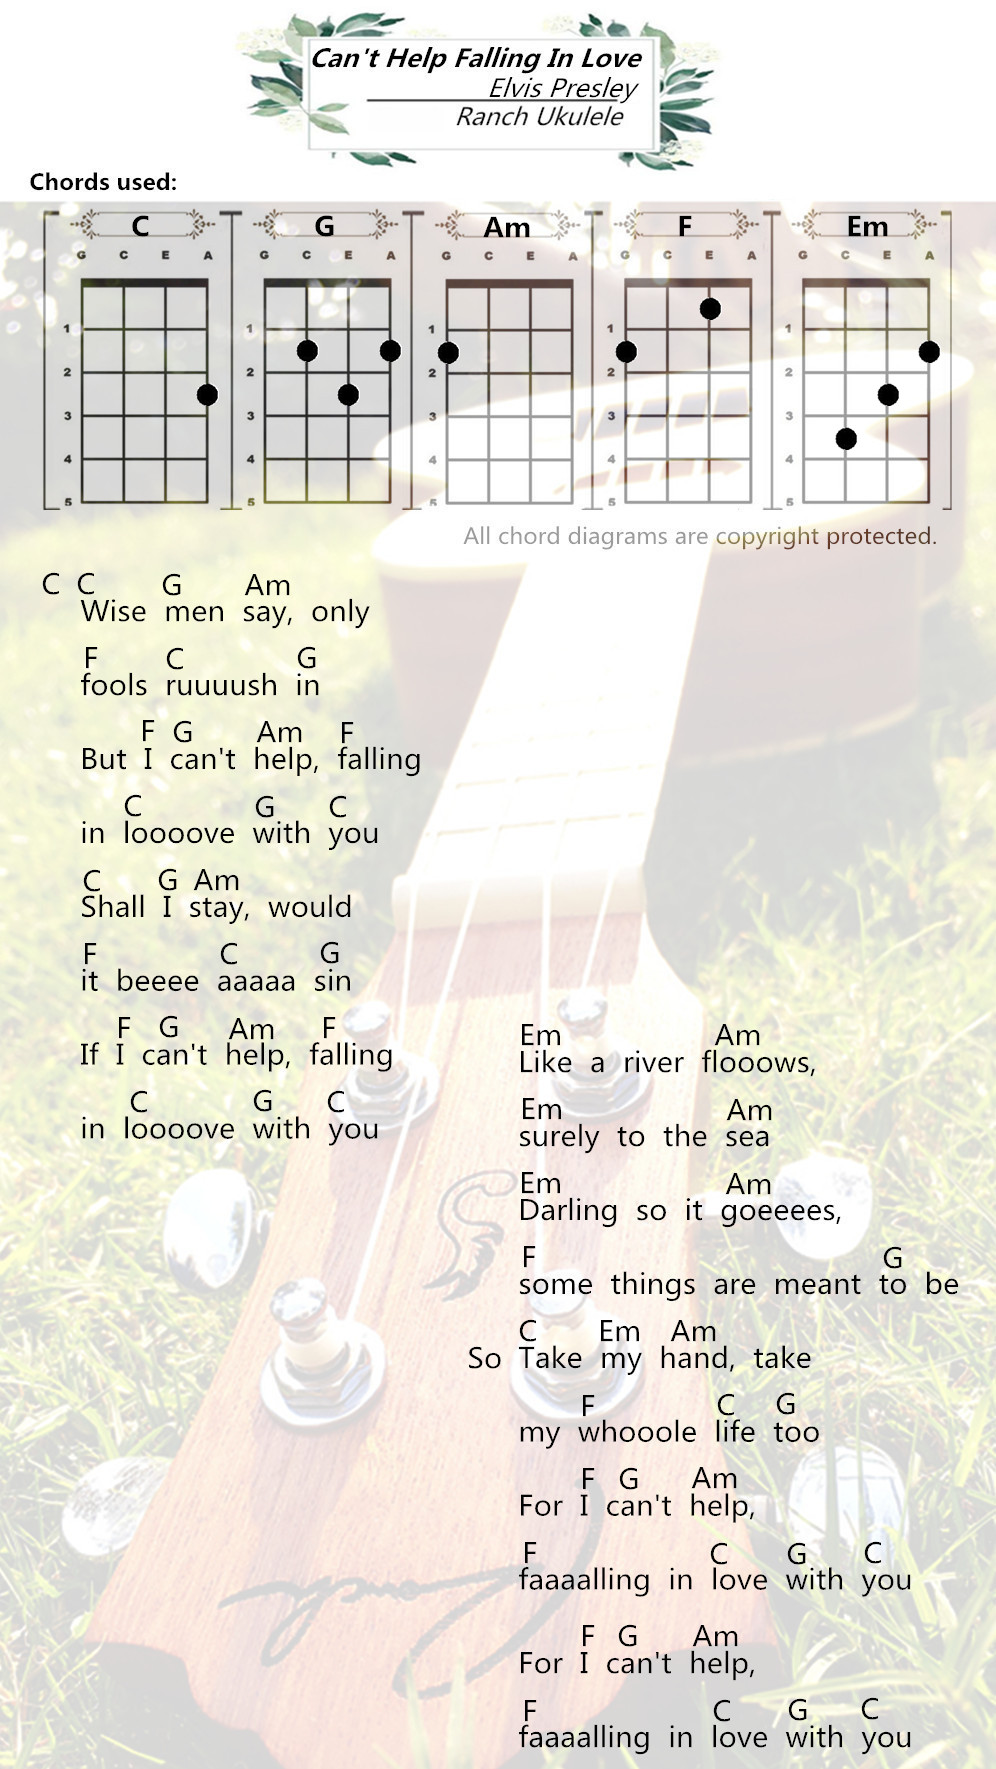 tonight is a wonderful time to fall in love chords